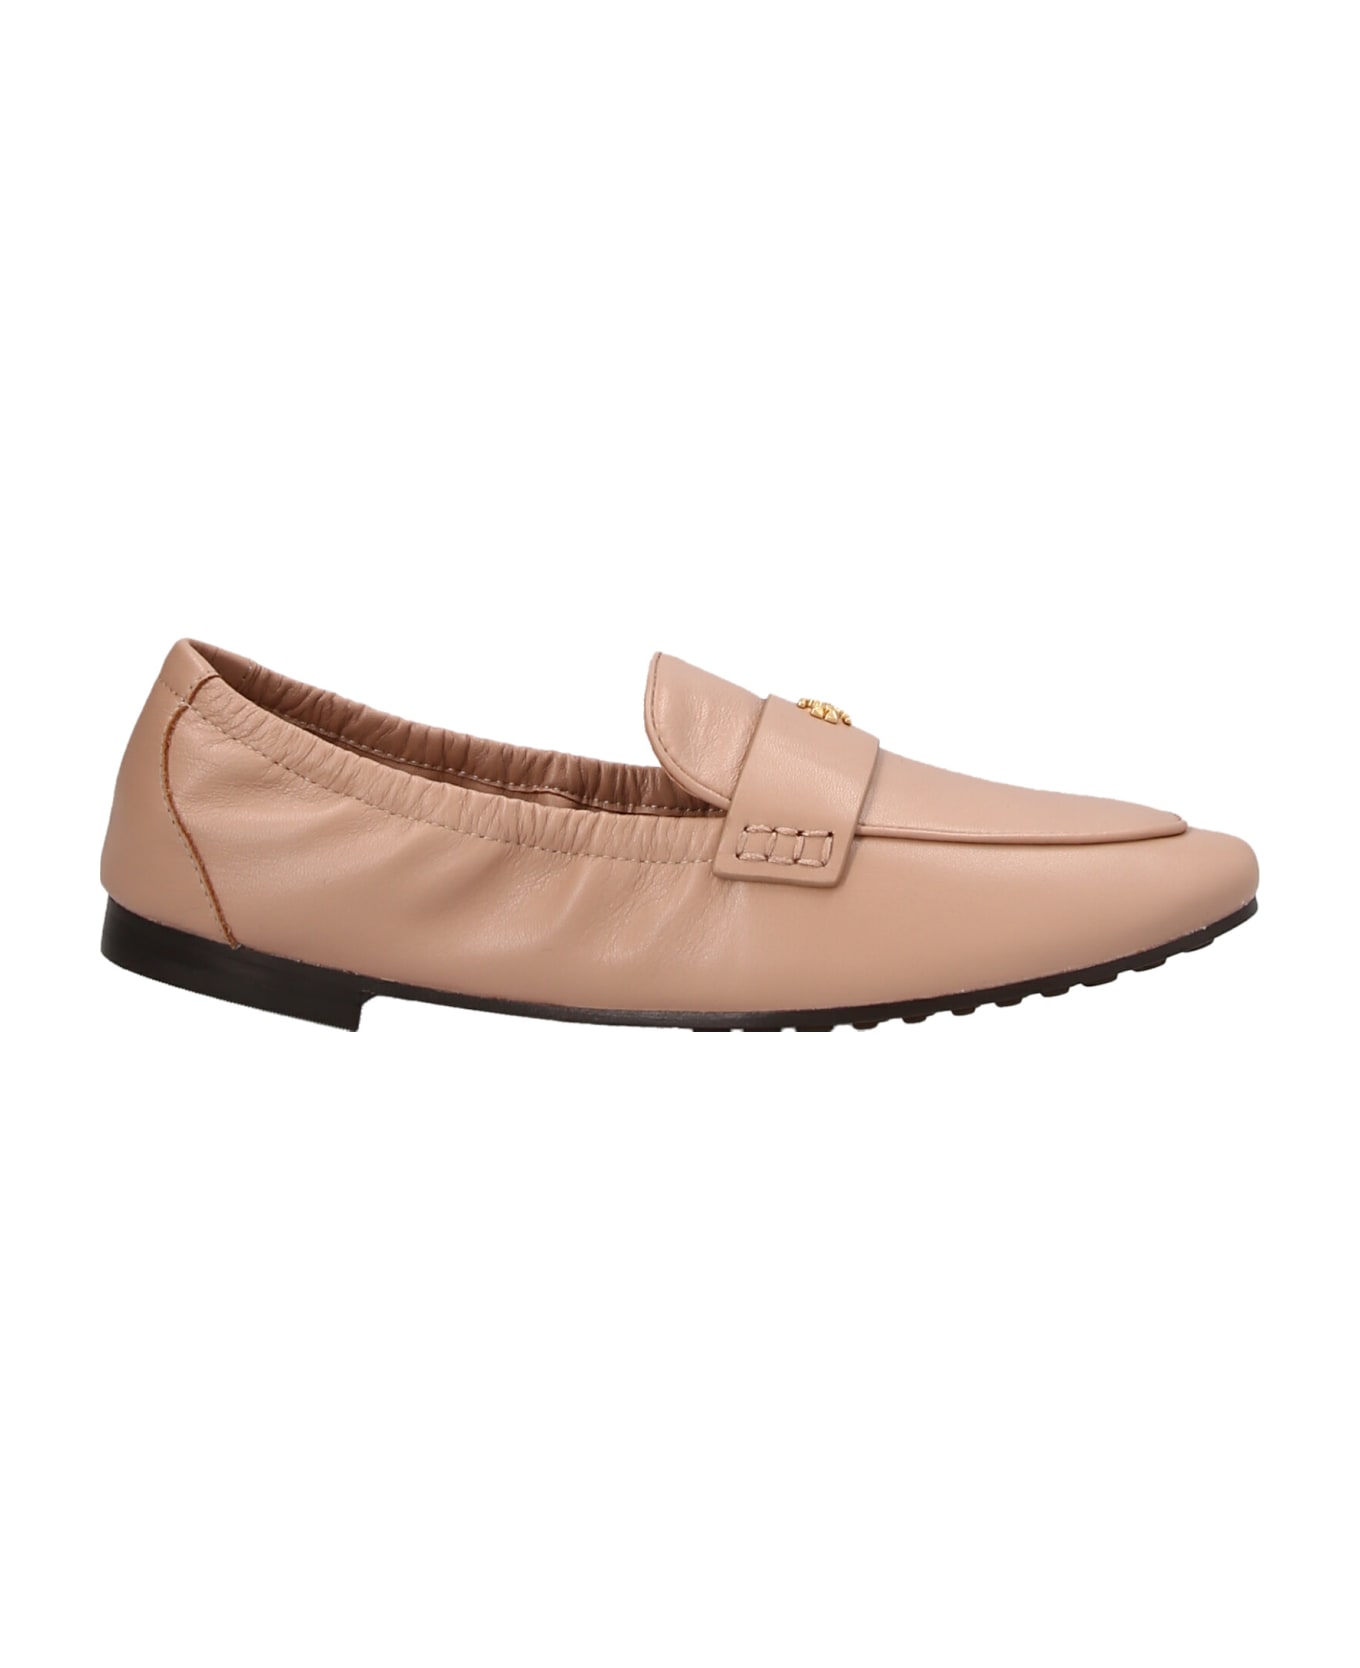 Tory Burch Ballet Leather Loafer - Pink Dune